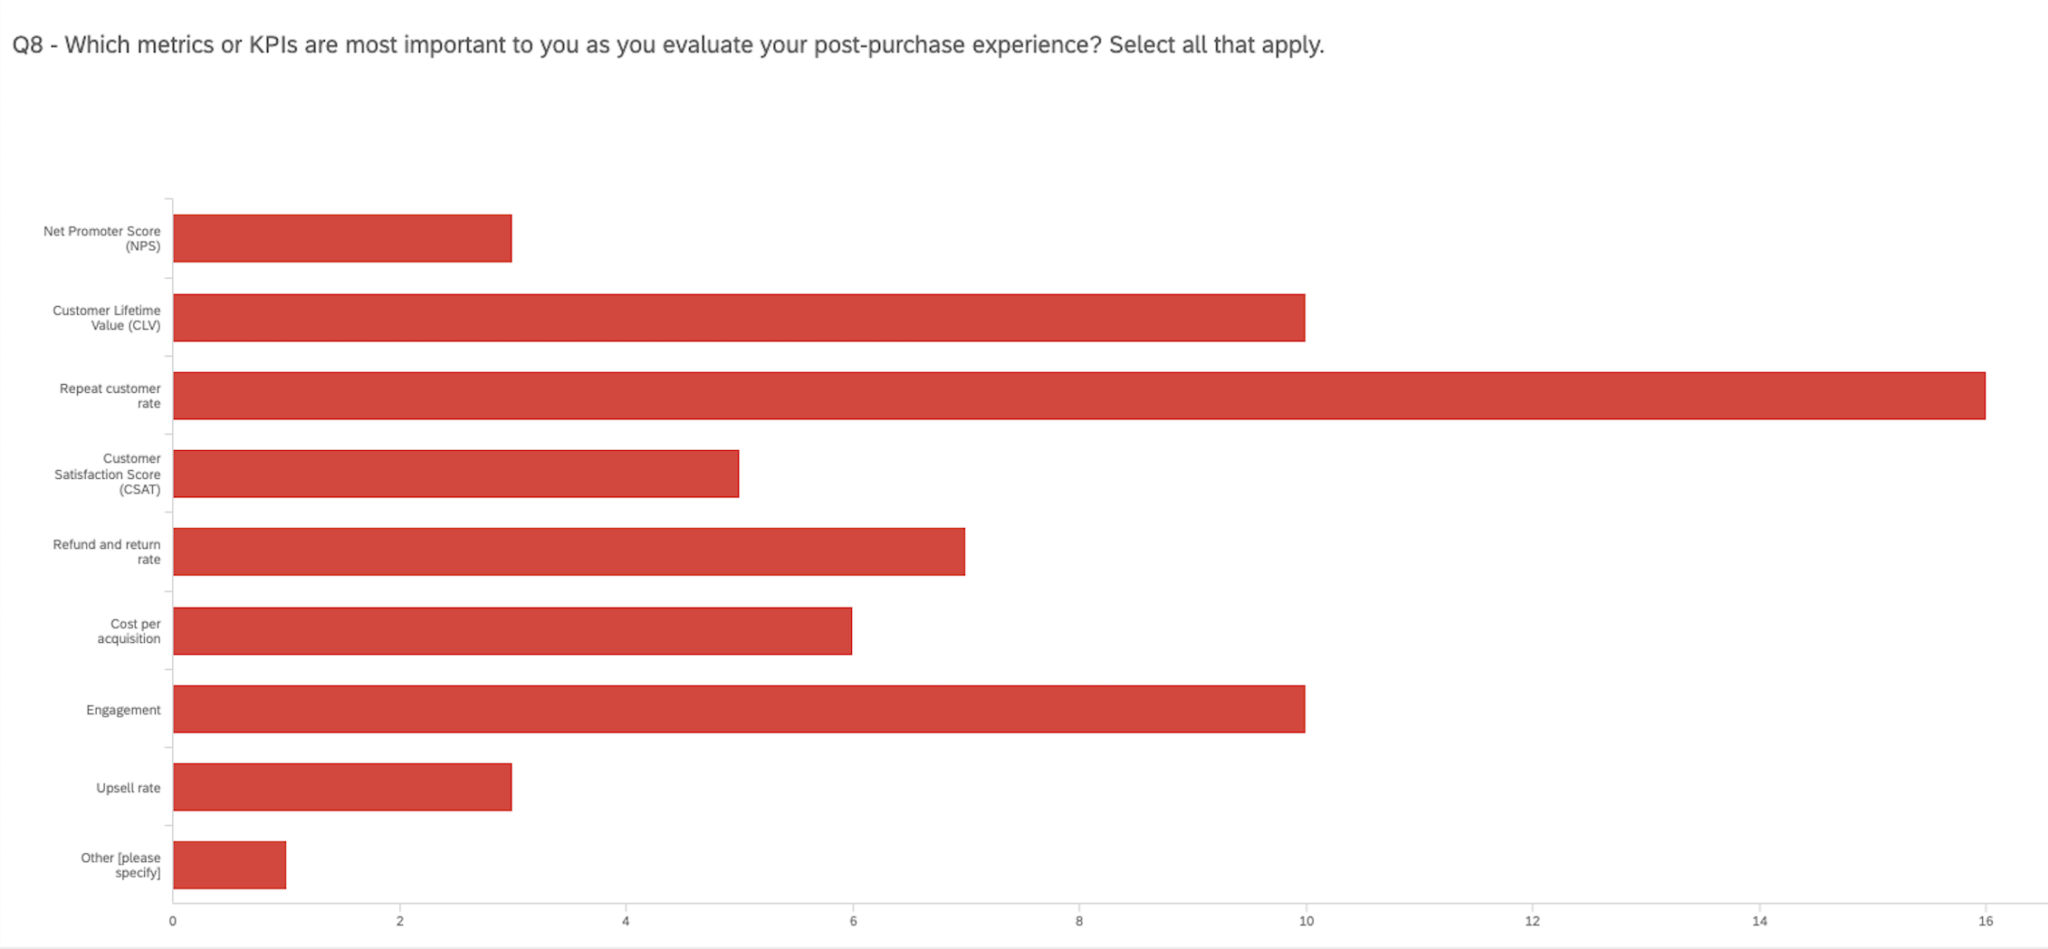 a survey of ecommerce brands showing repeat customer rate is most important